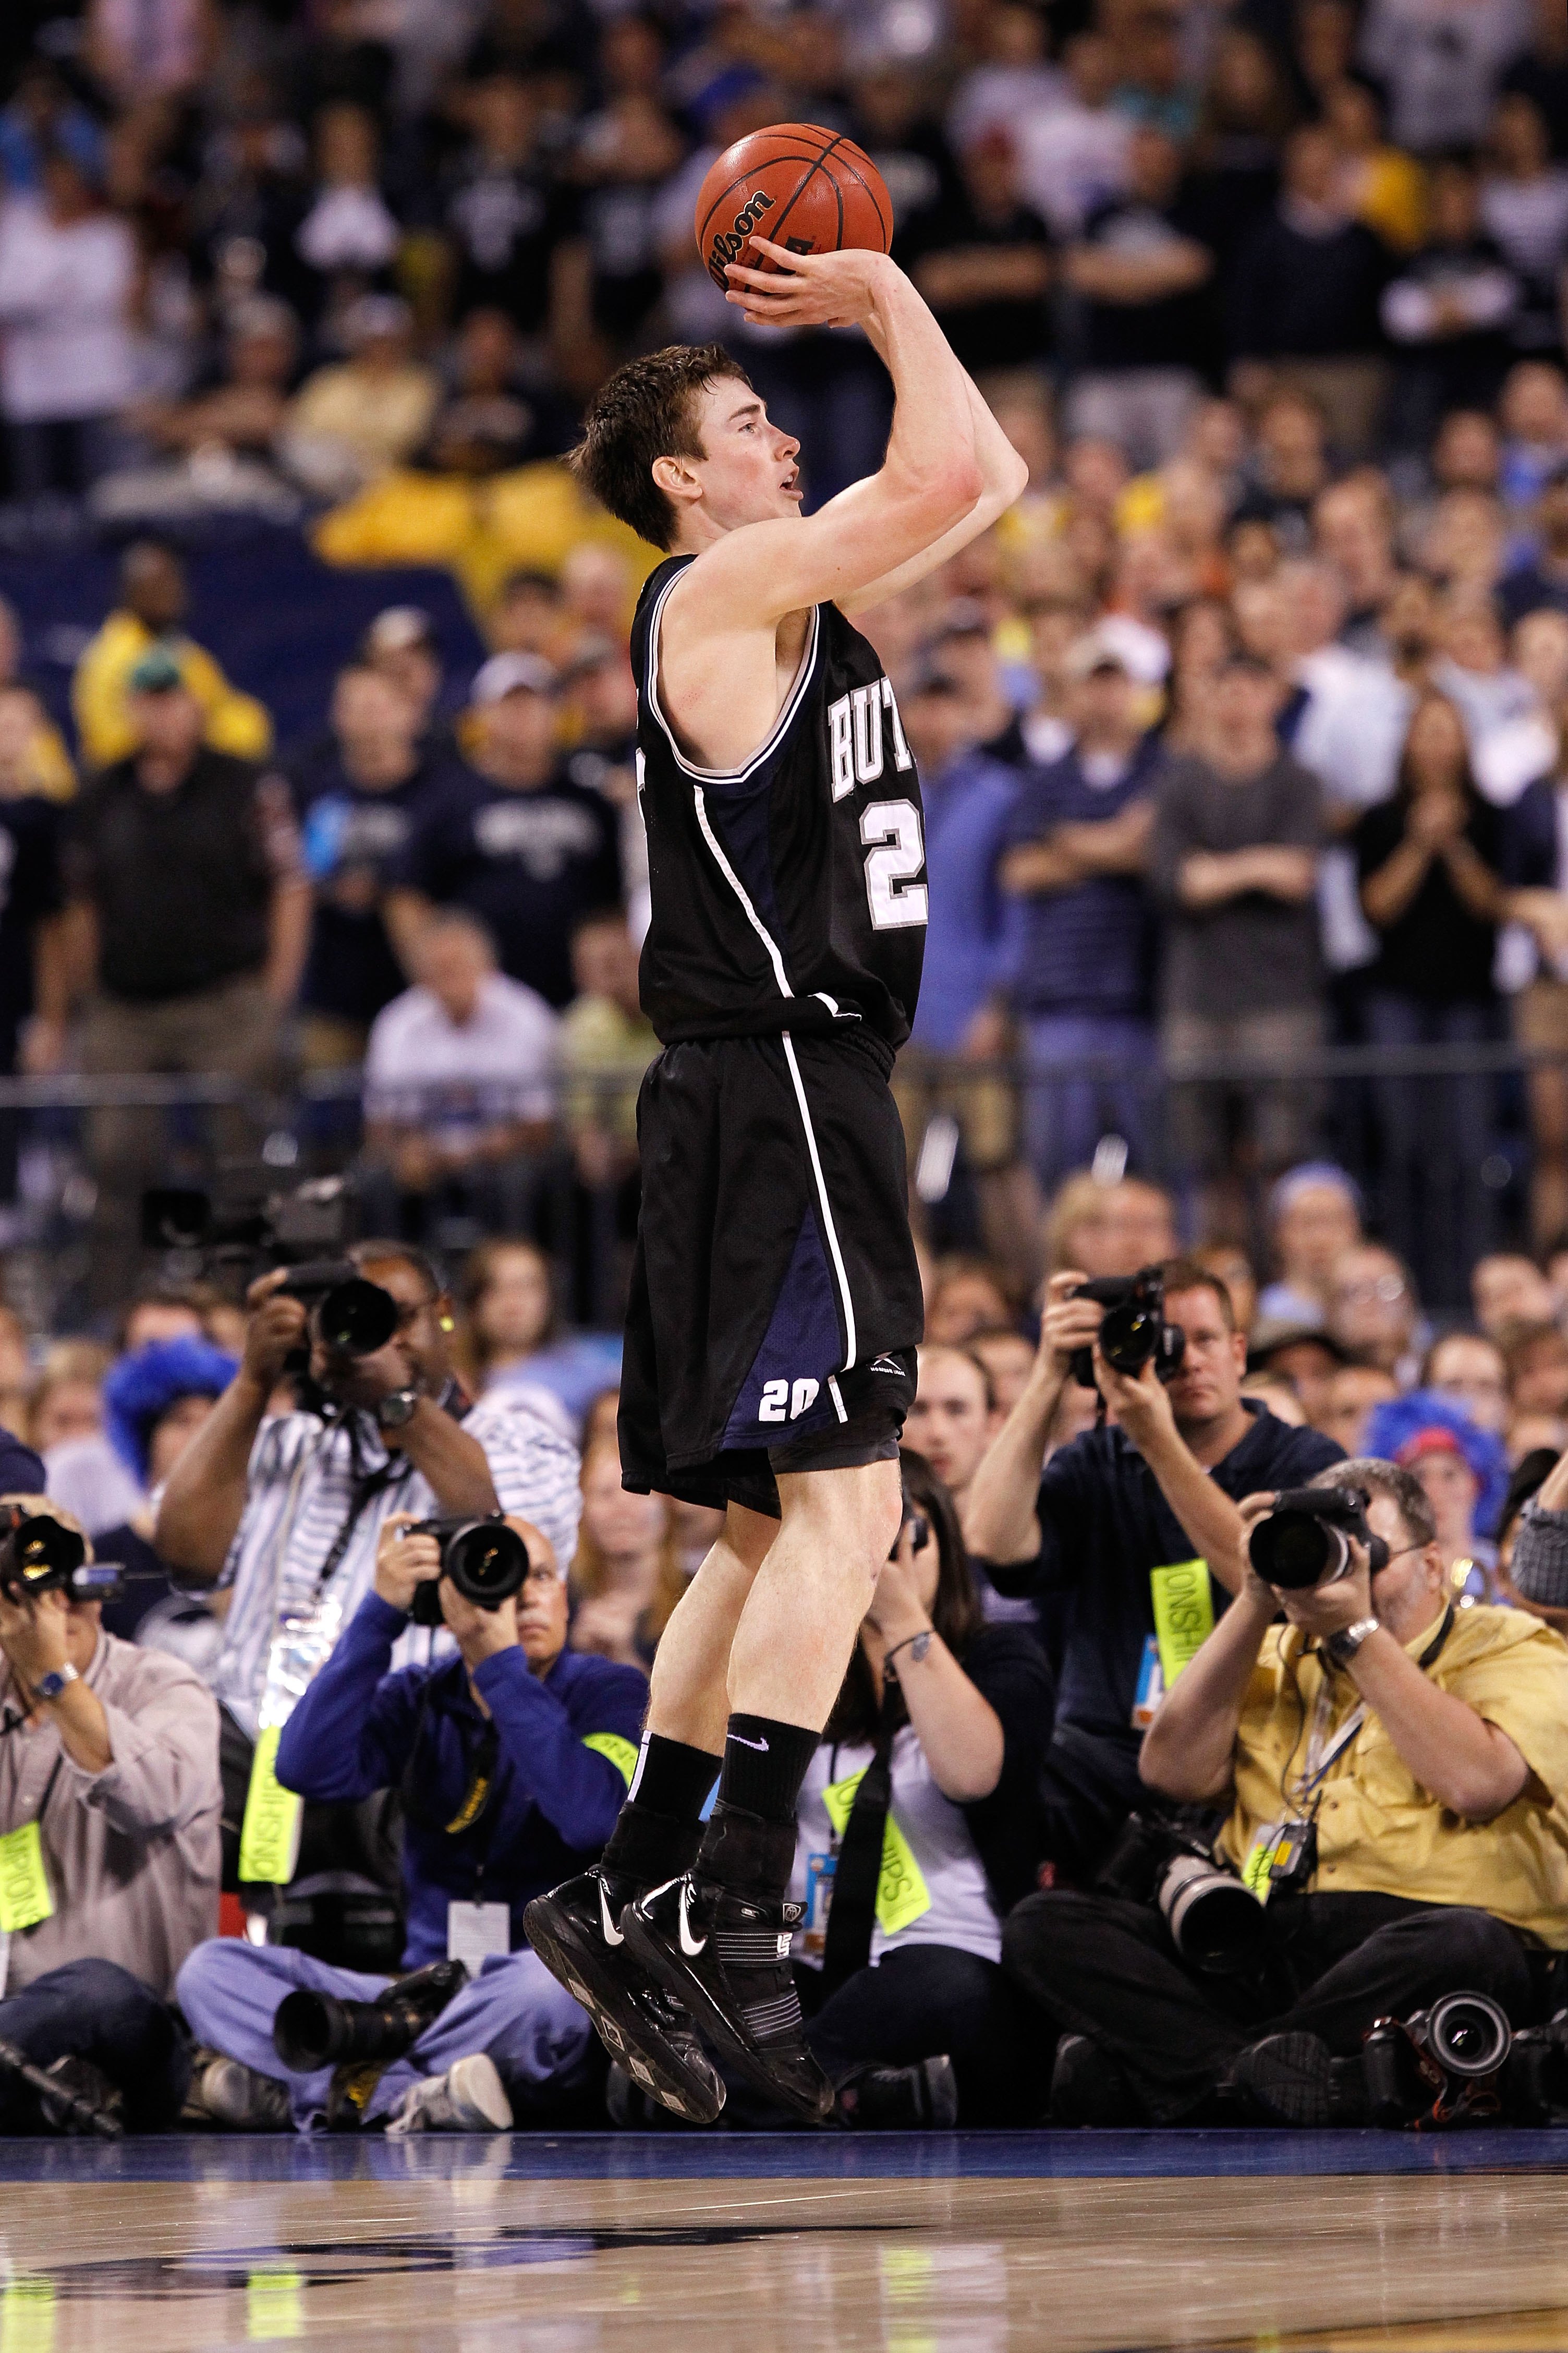 INDIANAPOLIS - APRIL 05:  Gordon Hayward #20 of the Butler Bulldogs attempts a shot in the second half  against the Duke Blue Devils during the 2010 NCAA Division I Men's Basketball National Championship game at Lucas Oil Stadium on April 5, 2010 in India